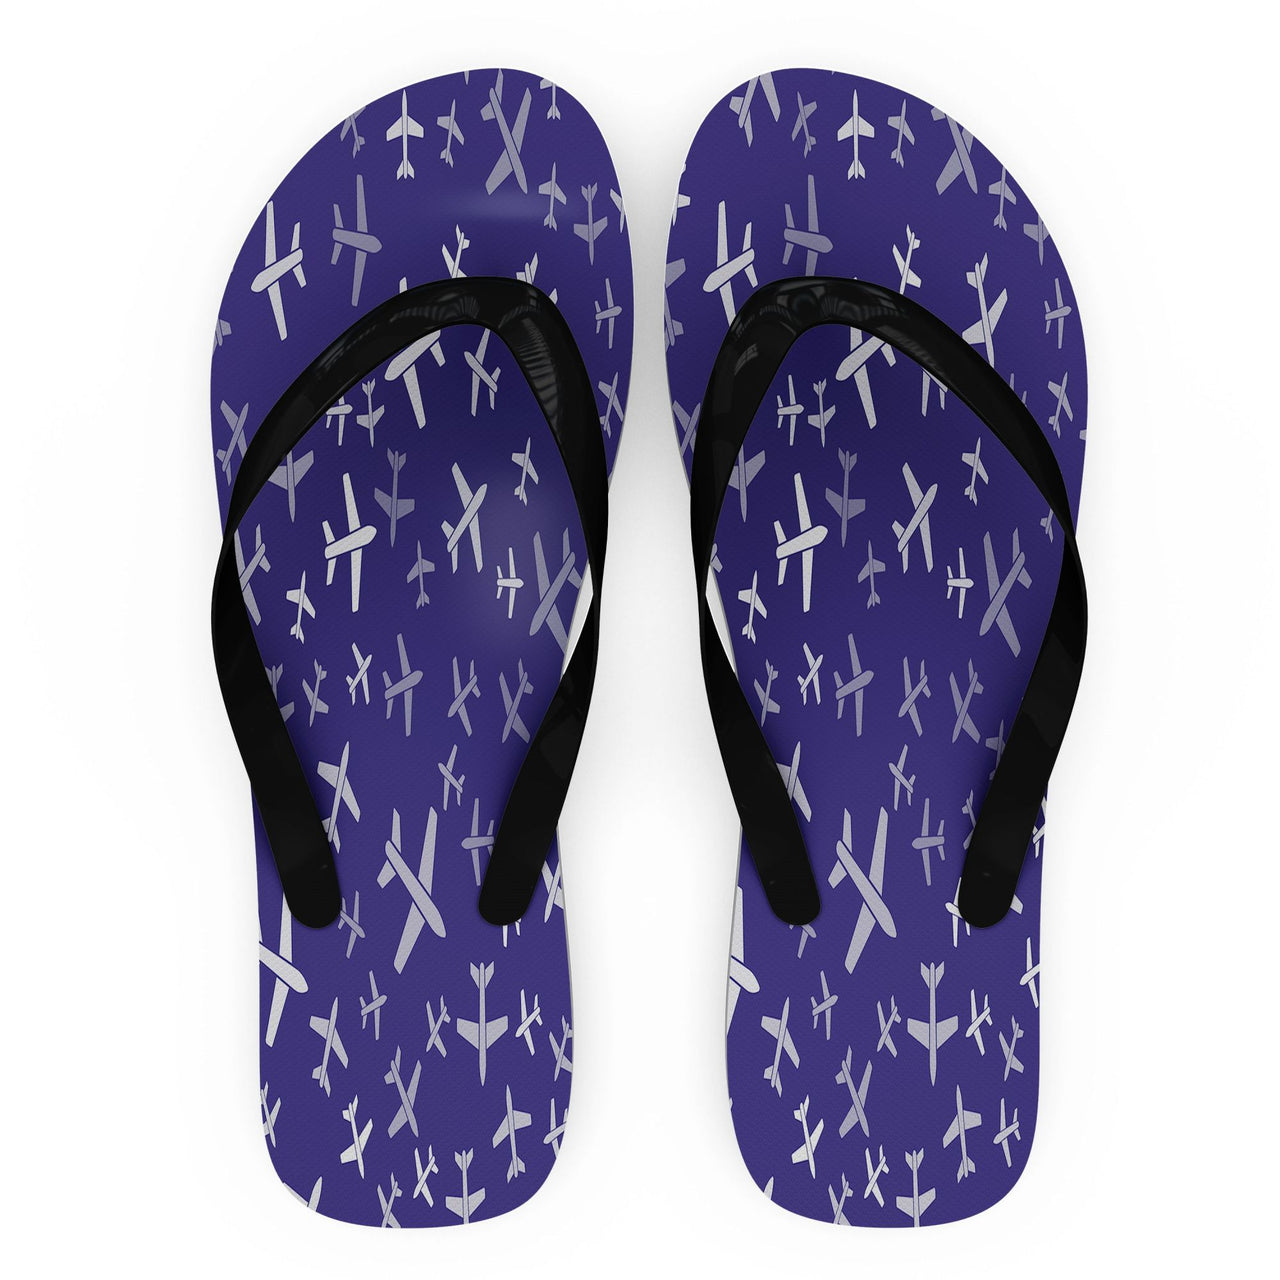 Different Sizes Seamless Airplanes Designed Slippers (Flip Flops)